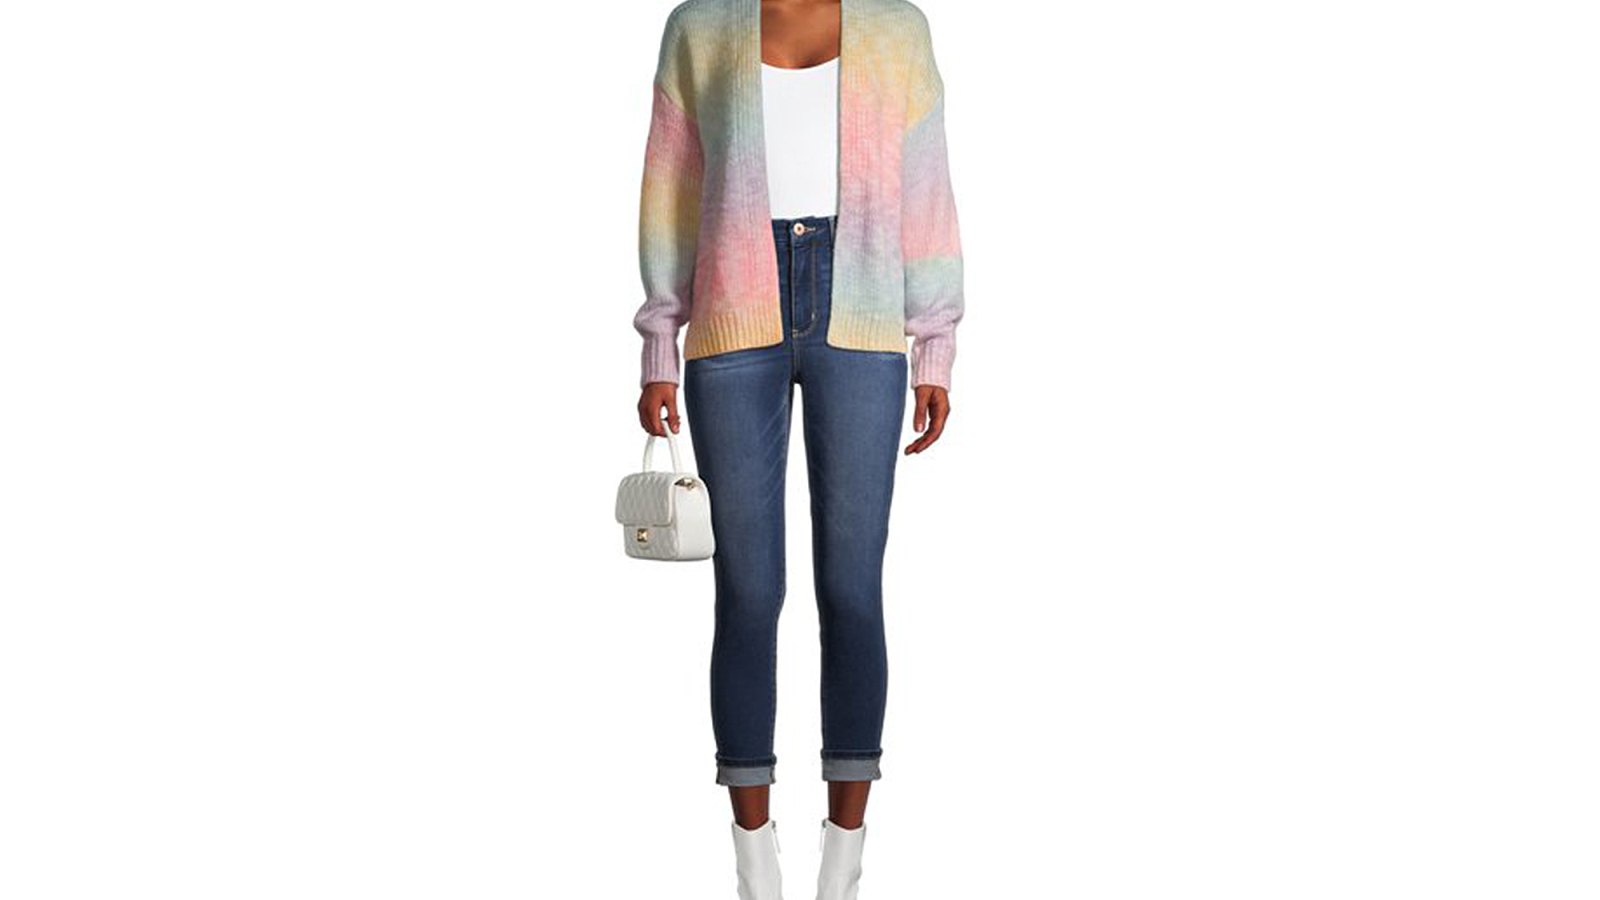 Dreamers by Debut Women's Rainbow Marled Cardigan Sweater